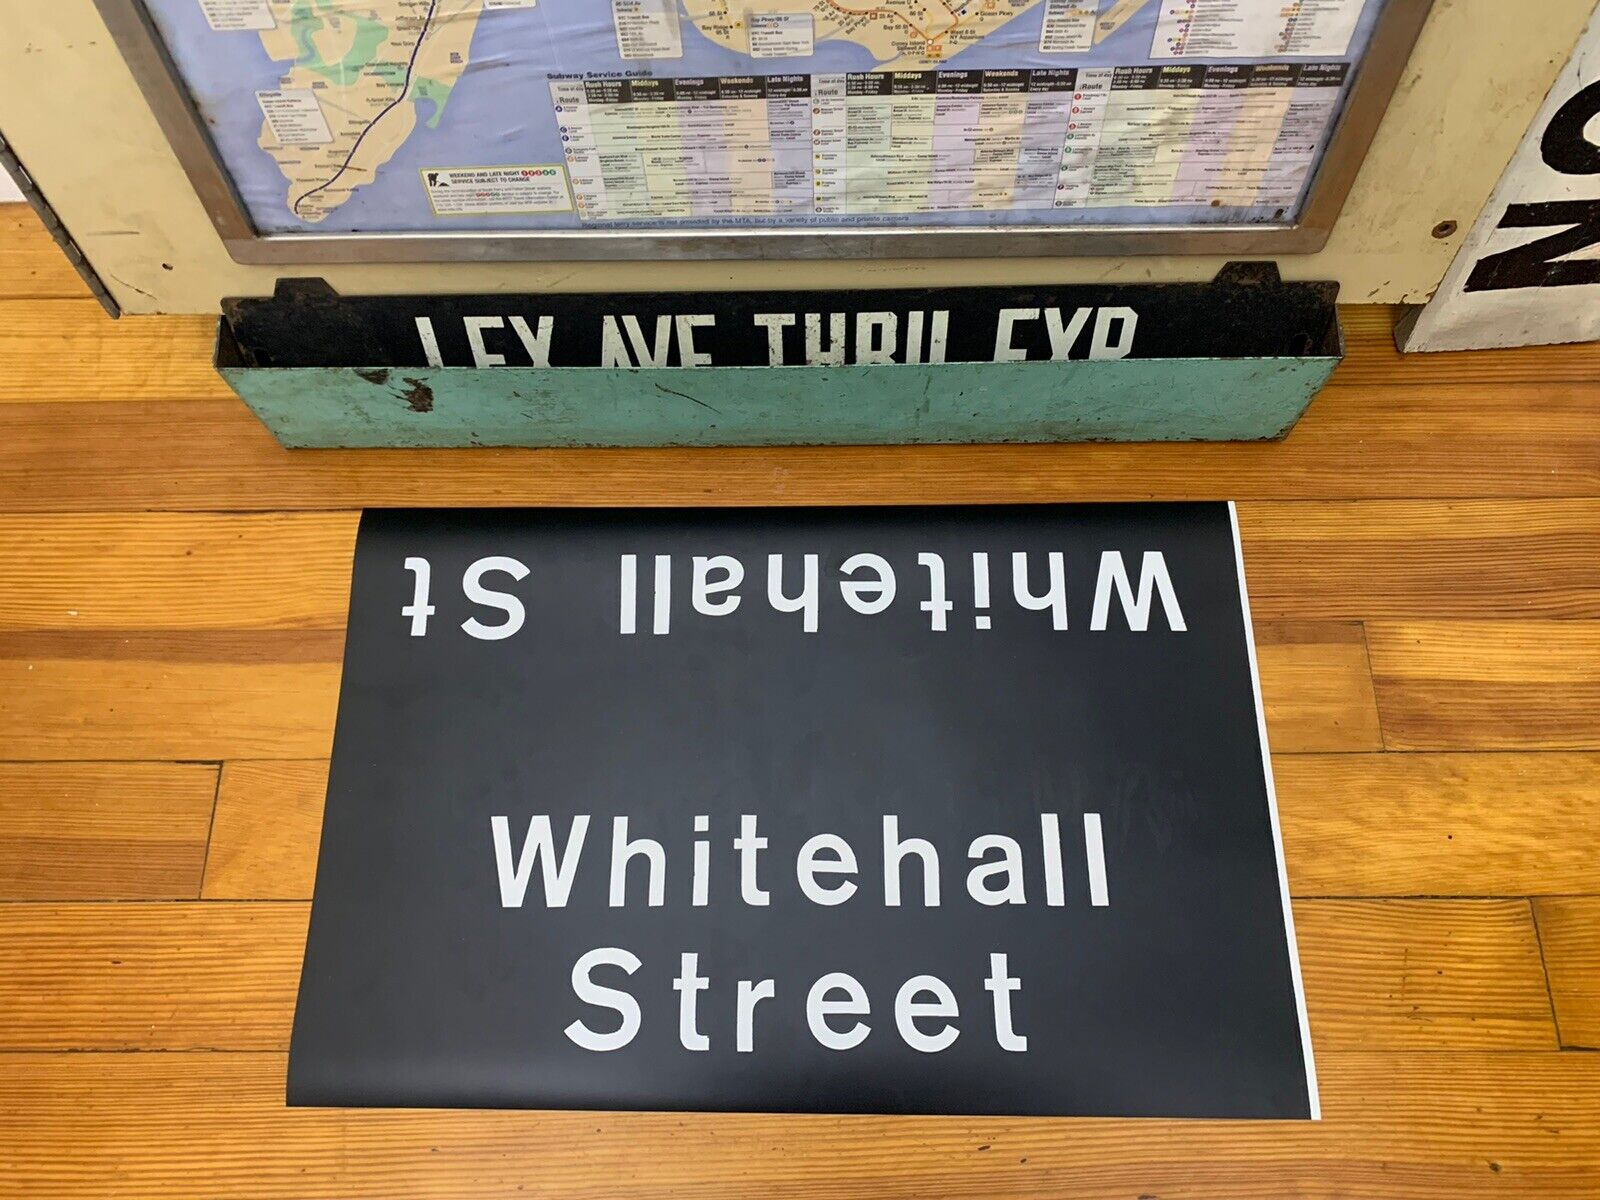 NYC SUBWAY ROLL SIGN WHITEHALL PEARL STREET MANHATTAN SOUTH FERRY BOWLING GREEN